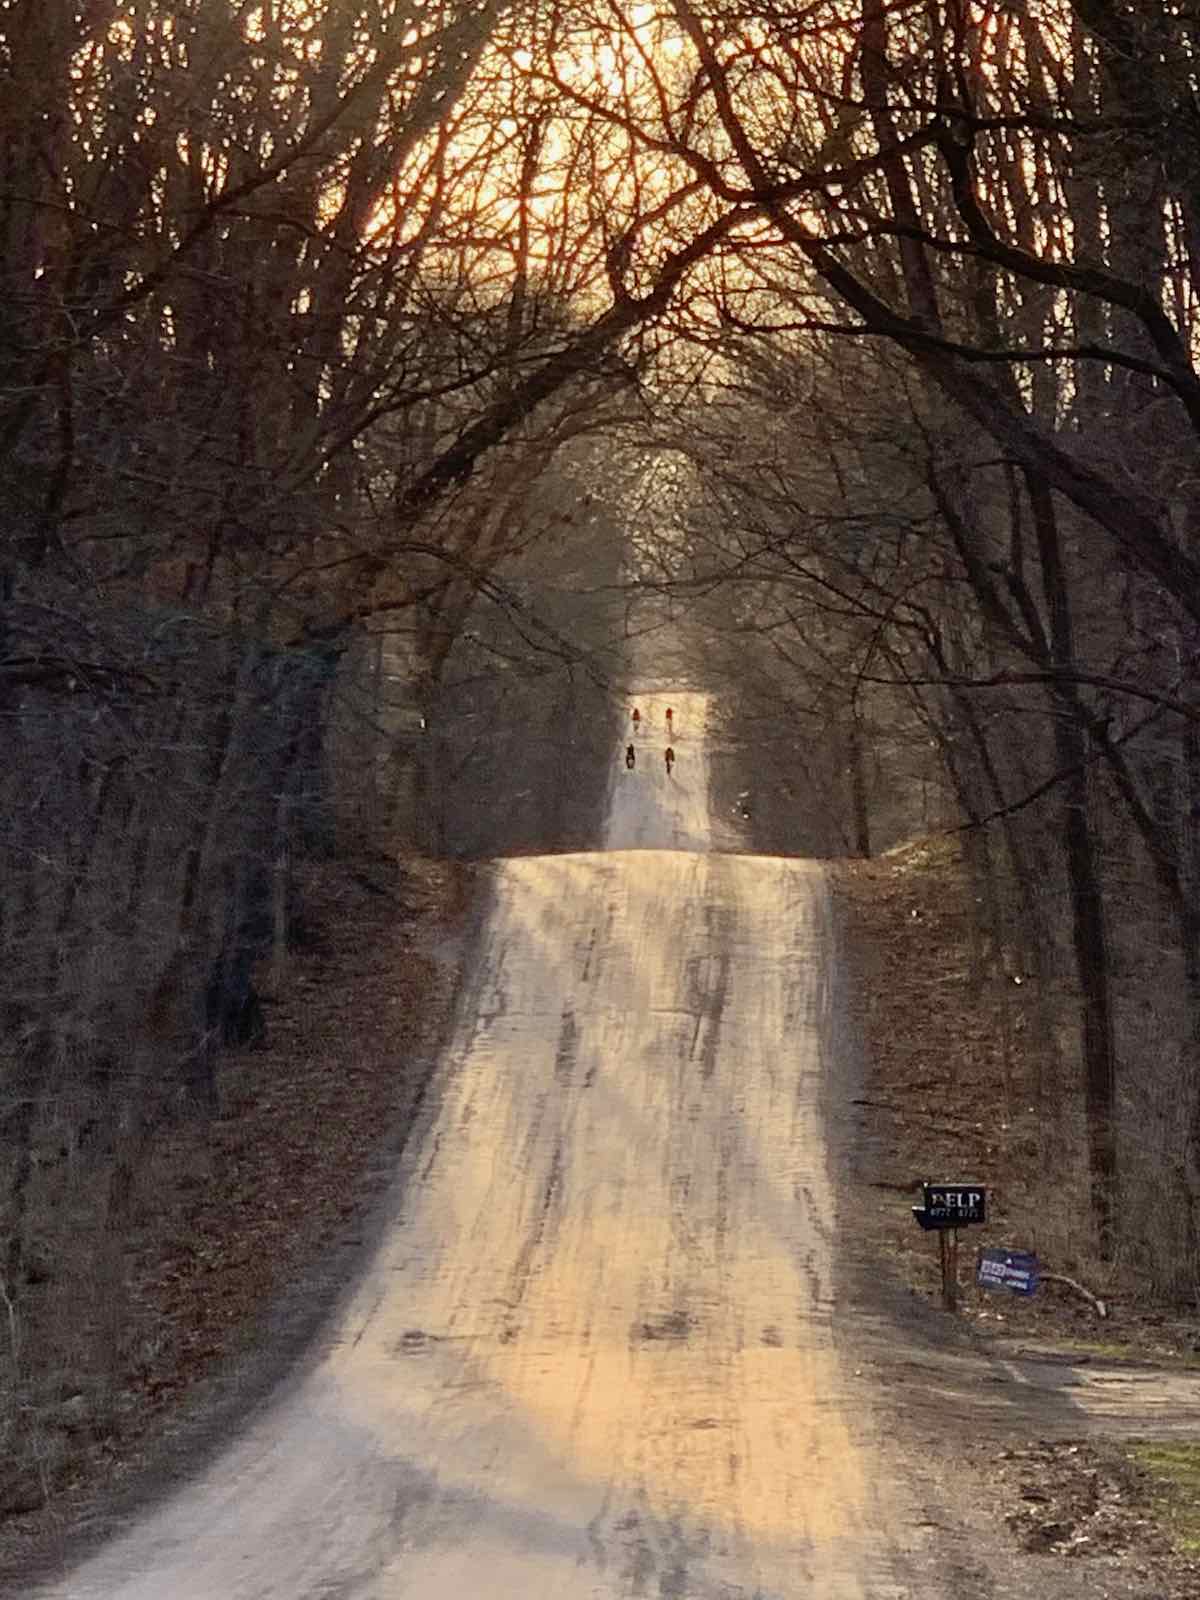 bikerumor pic of the day gravel bike riding in Ann Arbor, Michigan, a group of cyclists is in the distance over rolling gravel road with bare trees on either side and the setting sun peeking through.